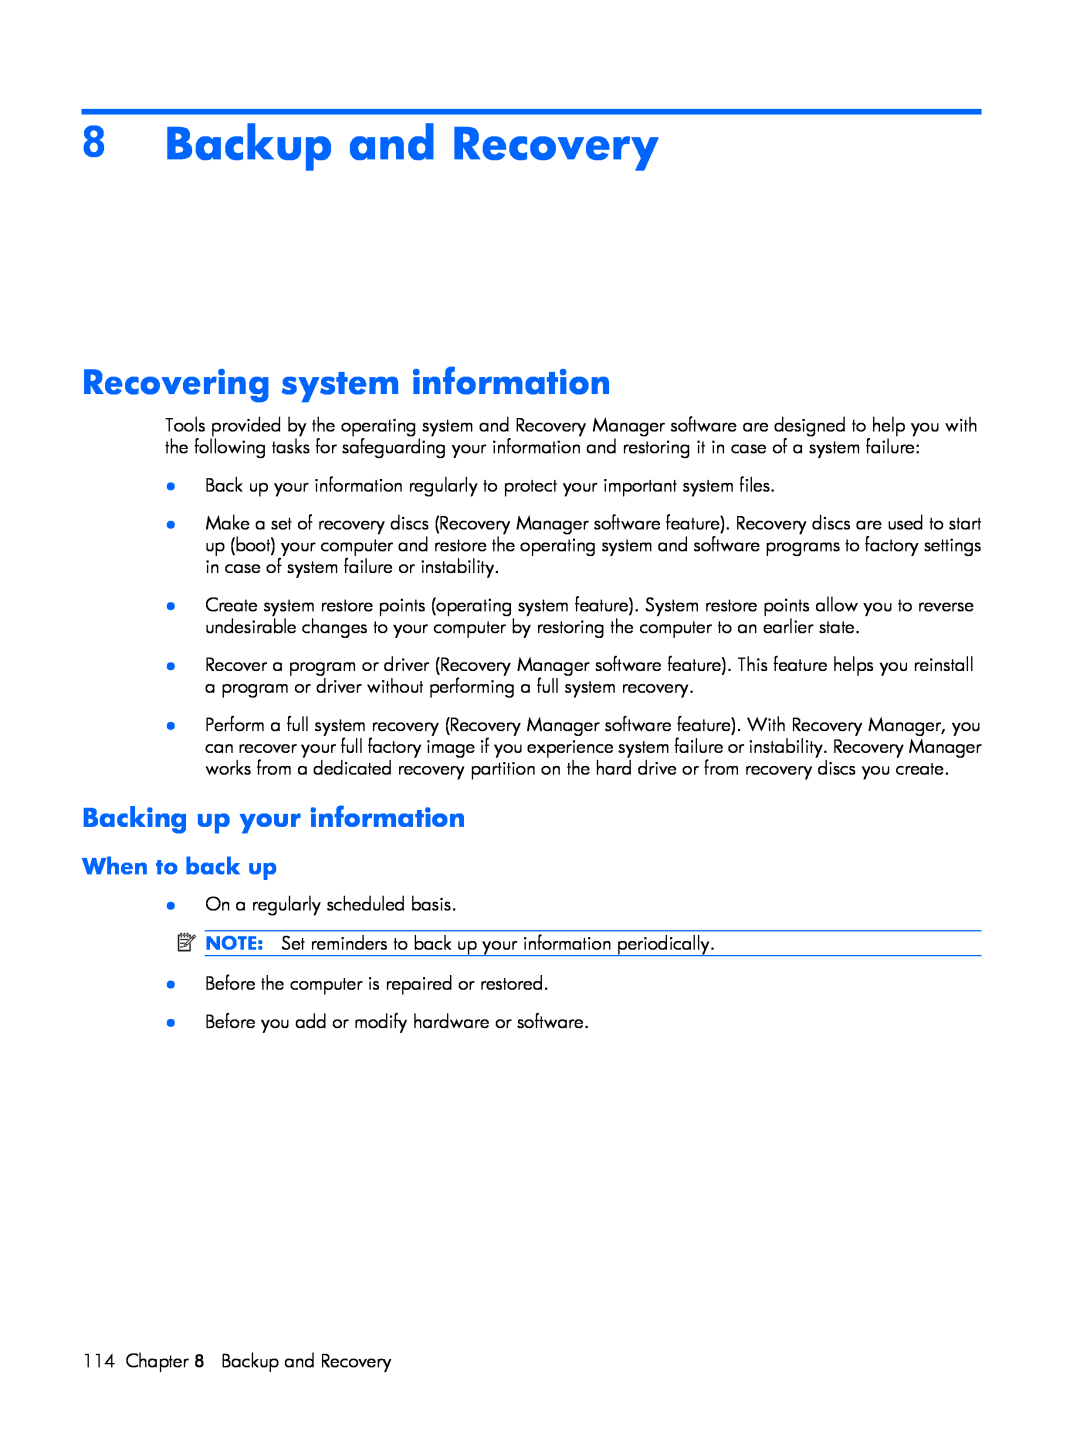 HP B1251TU, B1201VU, B1200 Backup and Recovery, Recovering system information, Backing up your information, When to back up 